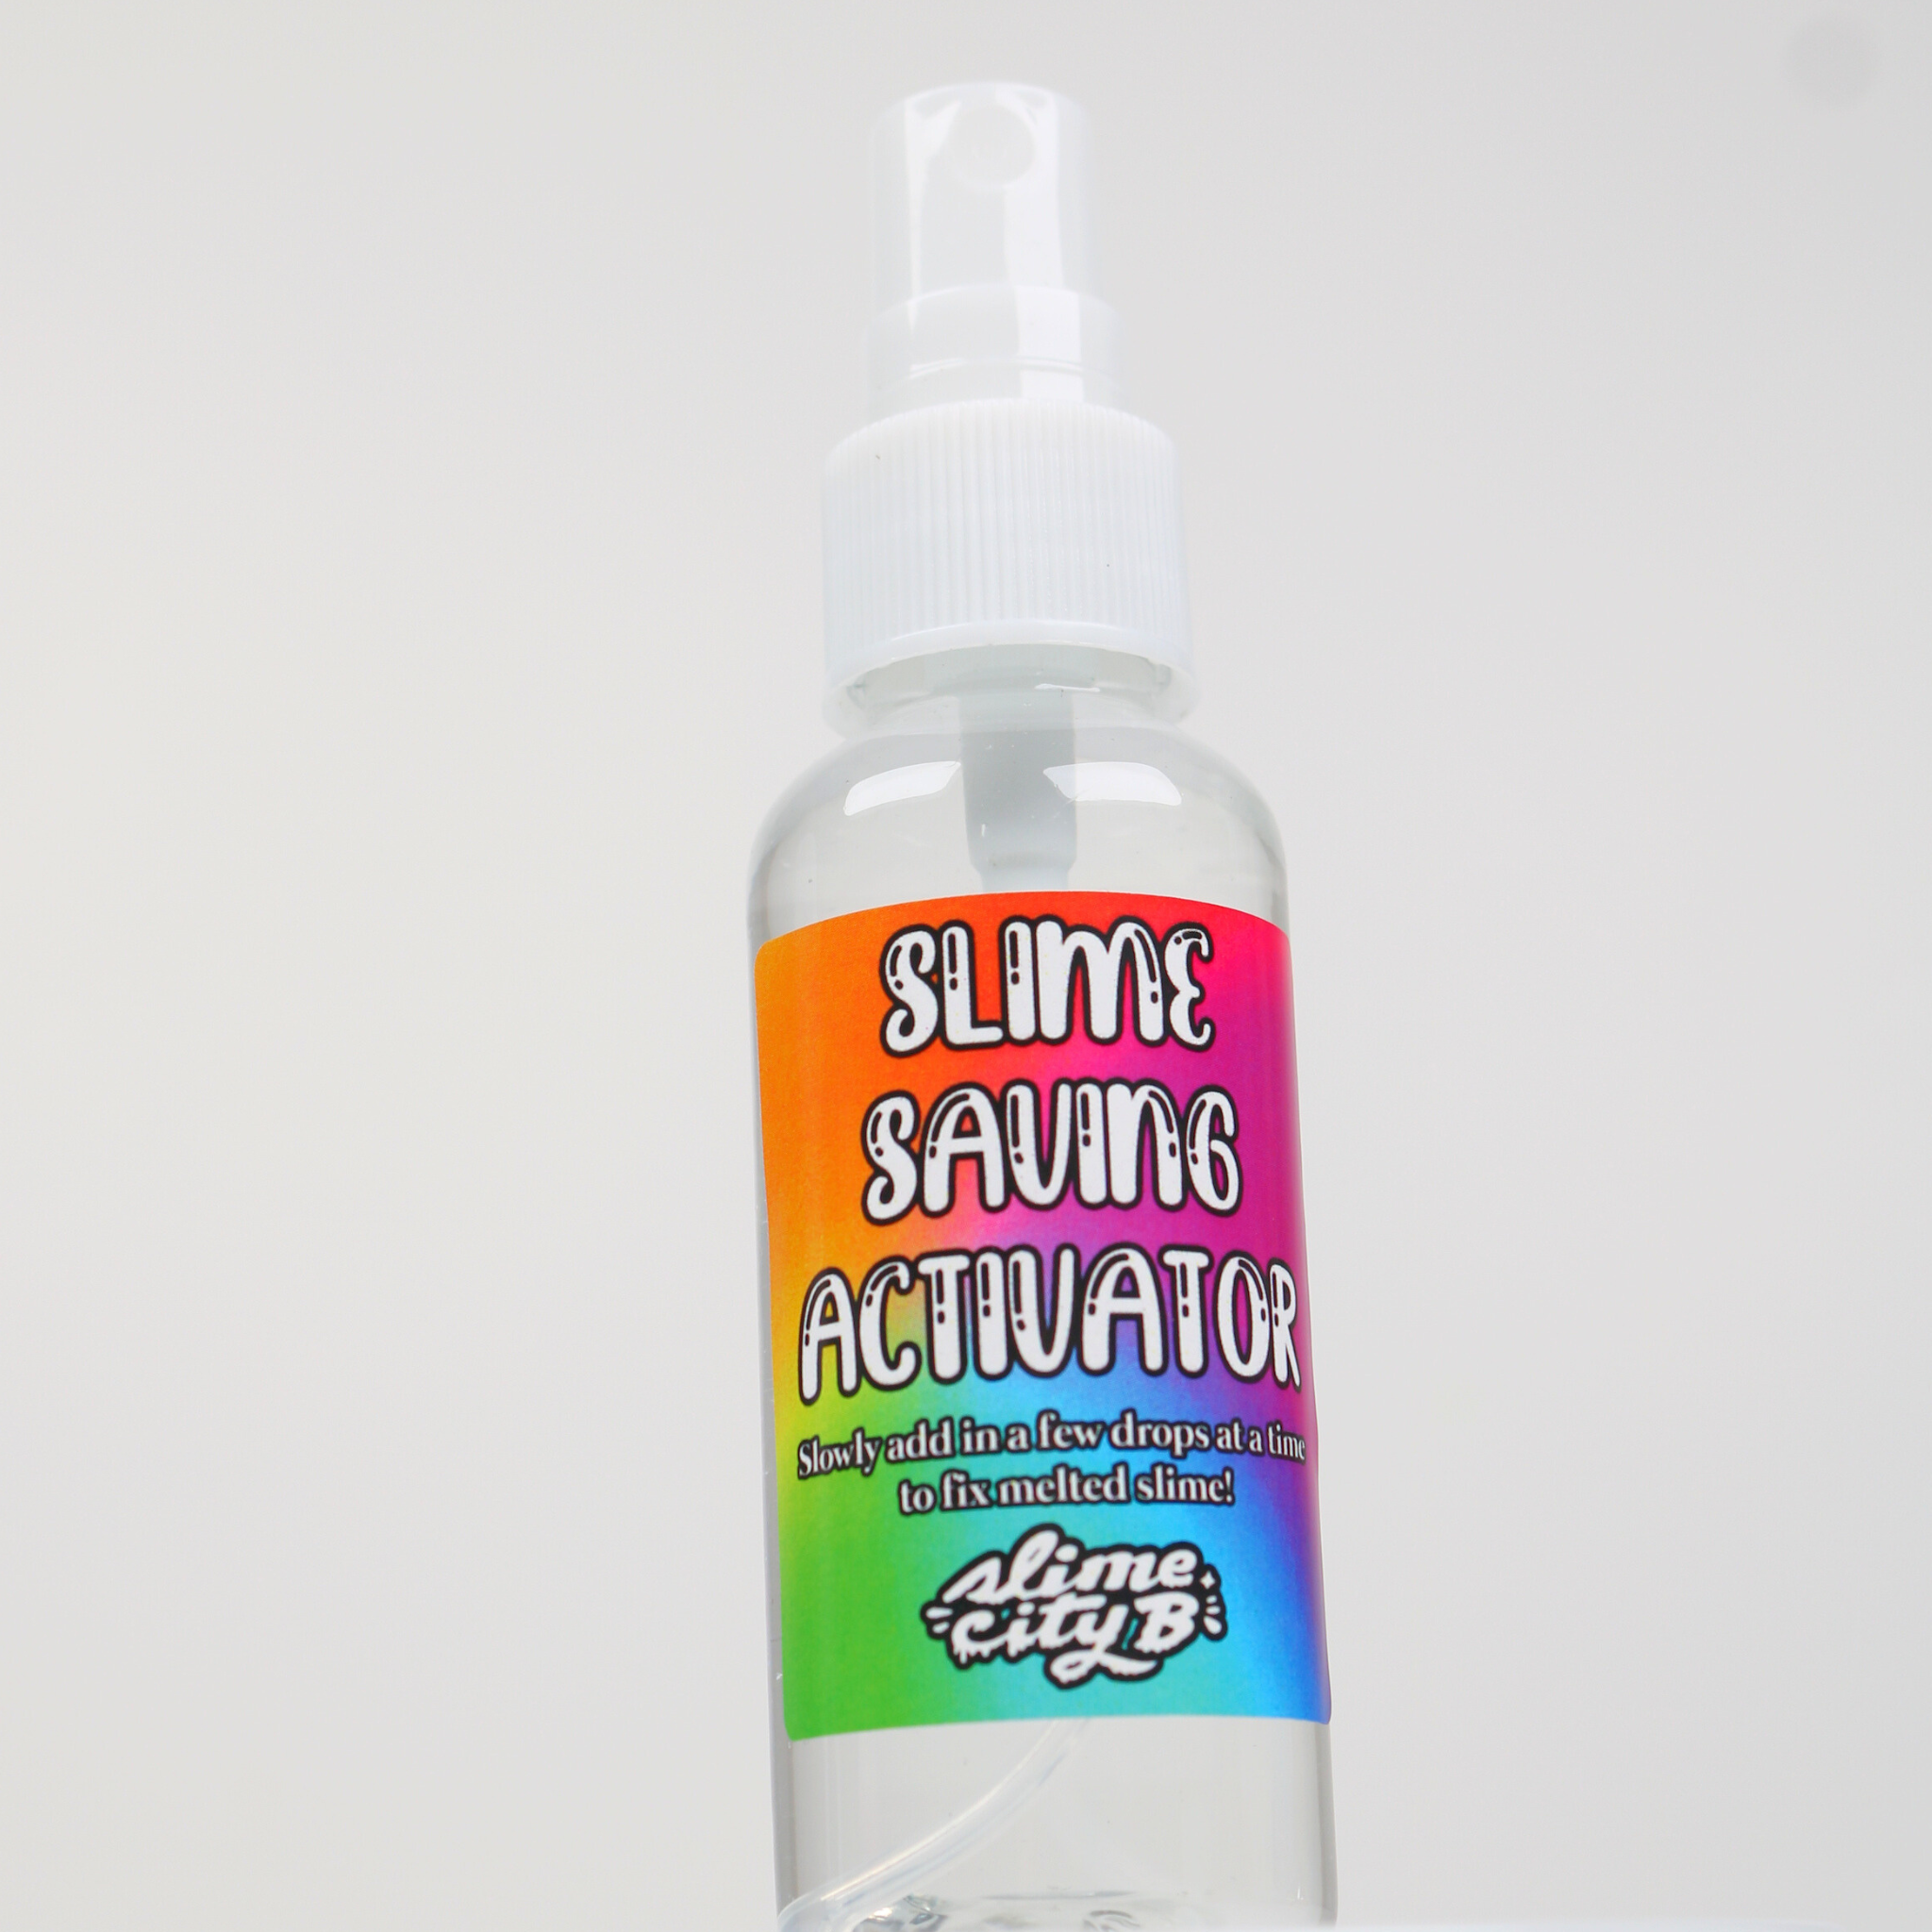 Magic City Slime Activator - Non Toxic, Just Add to Your Favorite